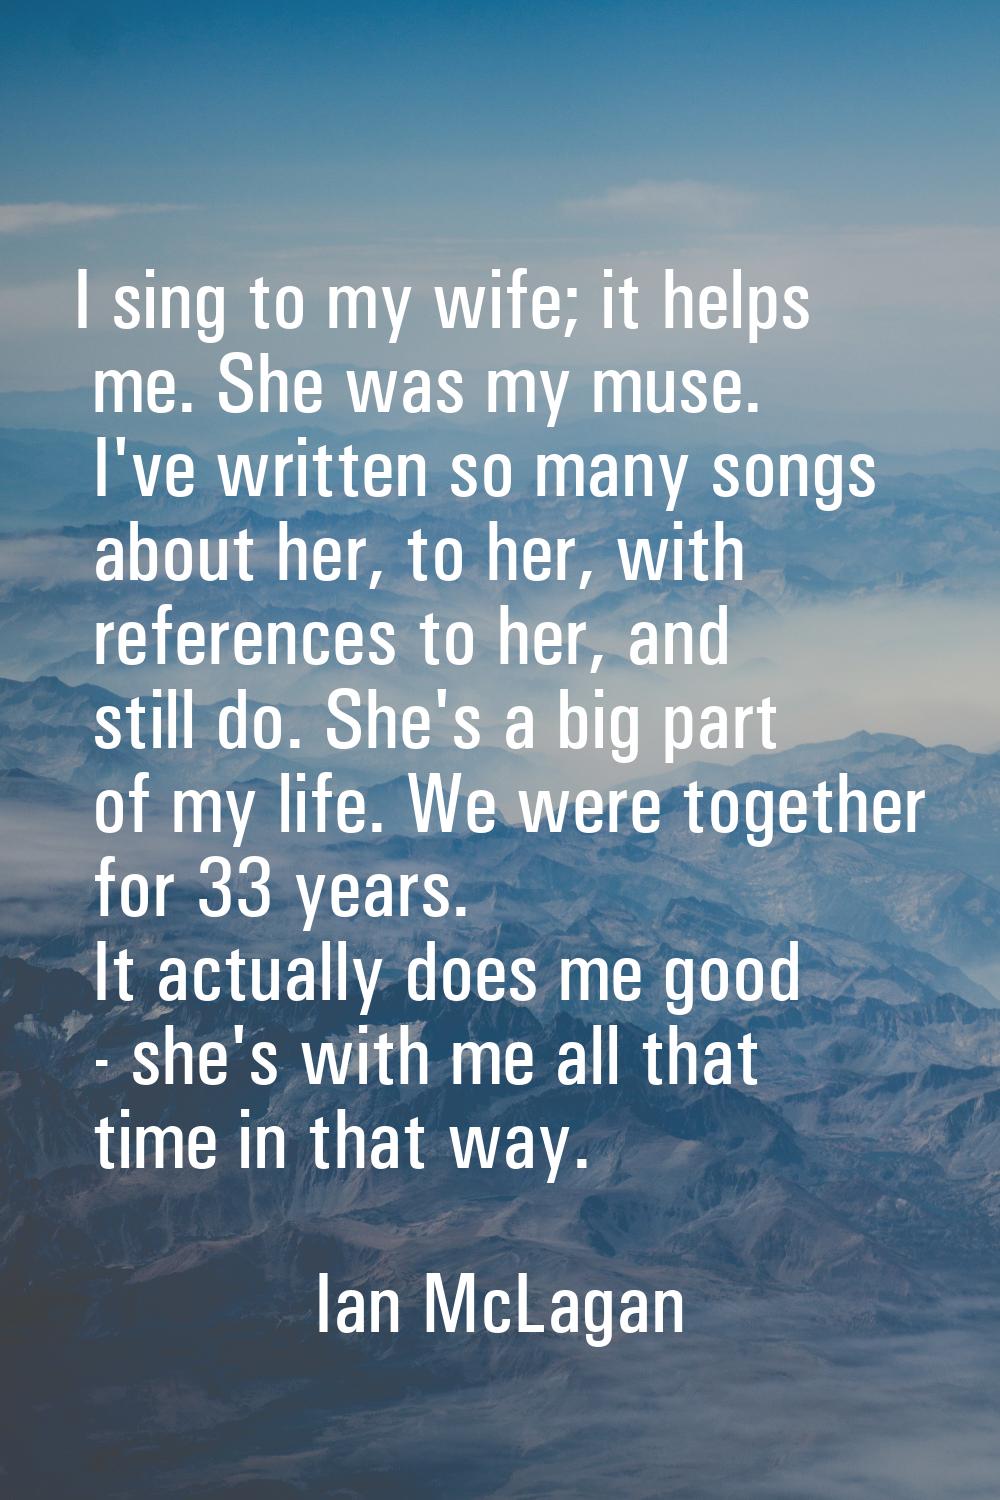 I sing to my wife; it helps me. She was my muse. I've written so many songs about her, to her, with